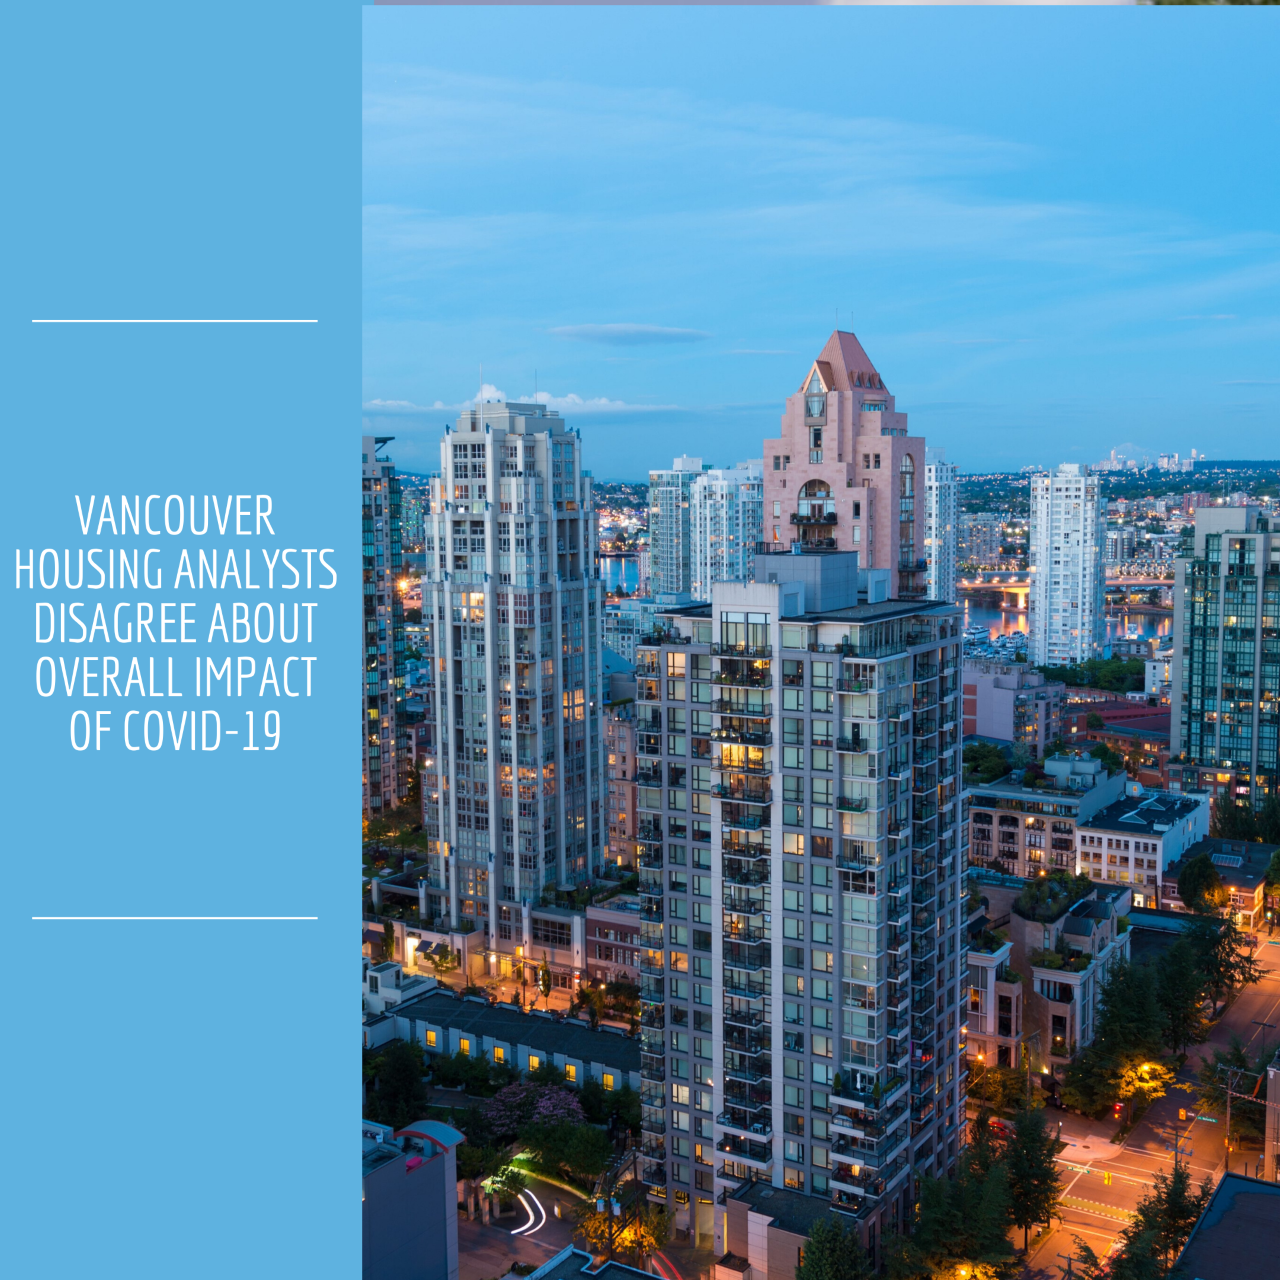 Vancouver housing analysts disagree about overall impact of COVID-19